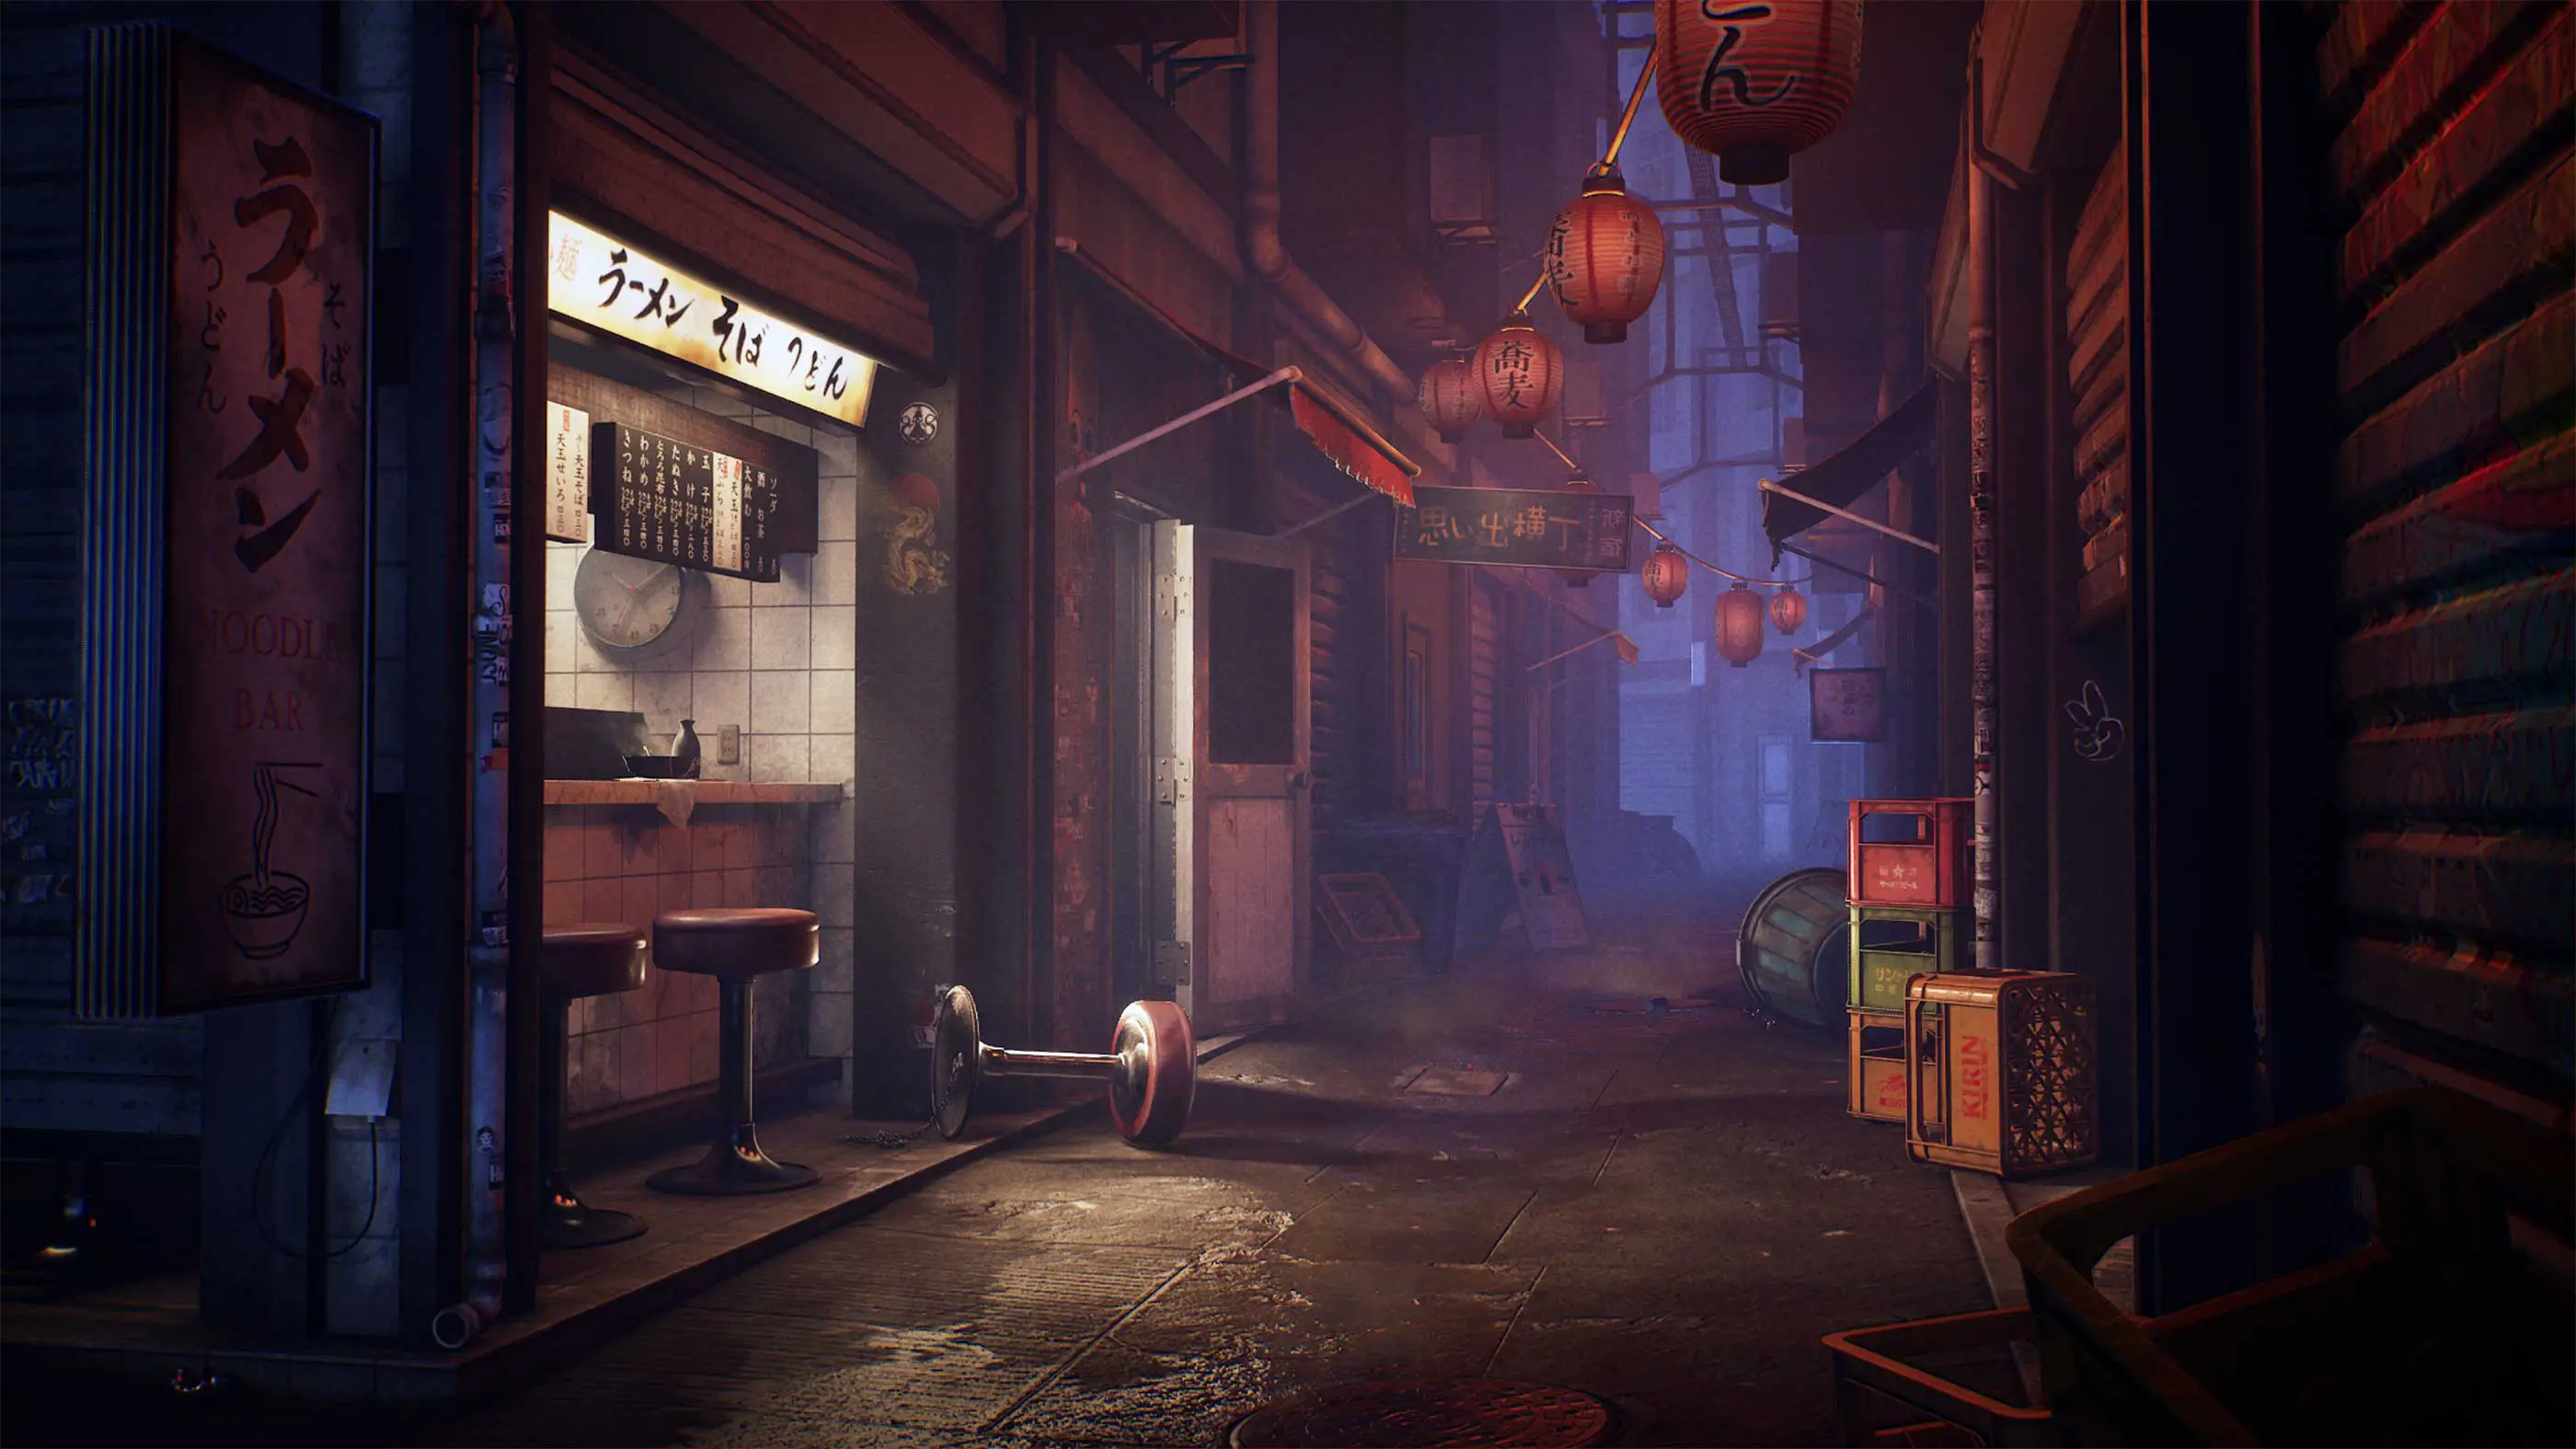 A 3D render of a messy alleyway in an Asian city.